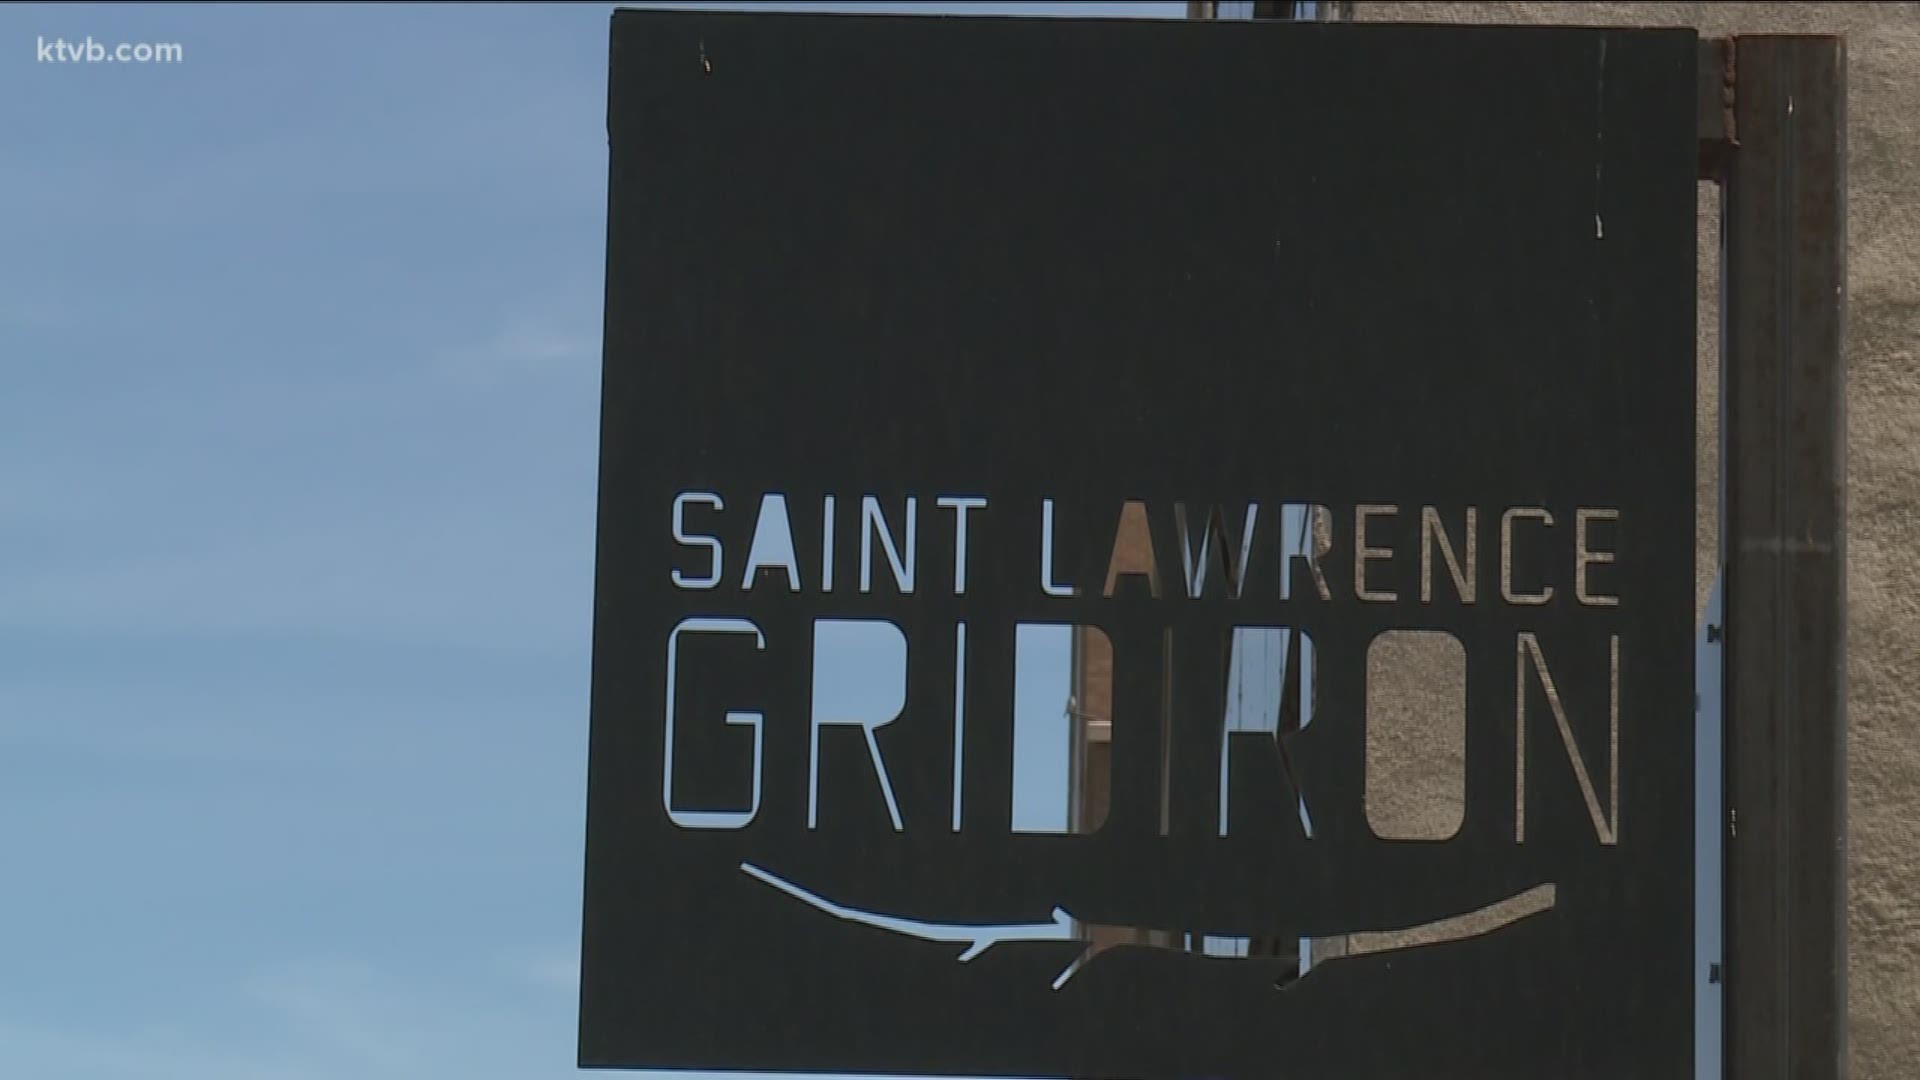 CDHD is urging customers who ate at Saint Lawrence Gridiron between June 21 and July 14 to check their immunization records.